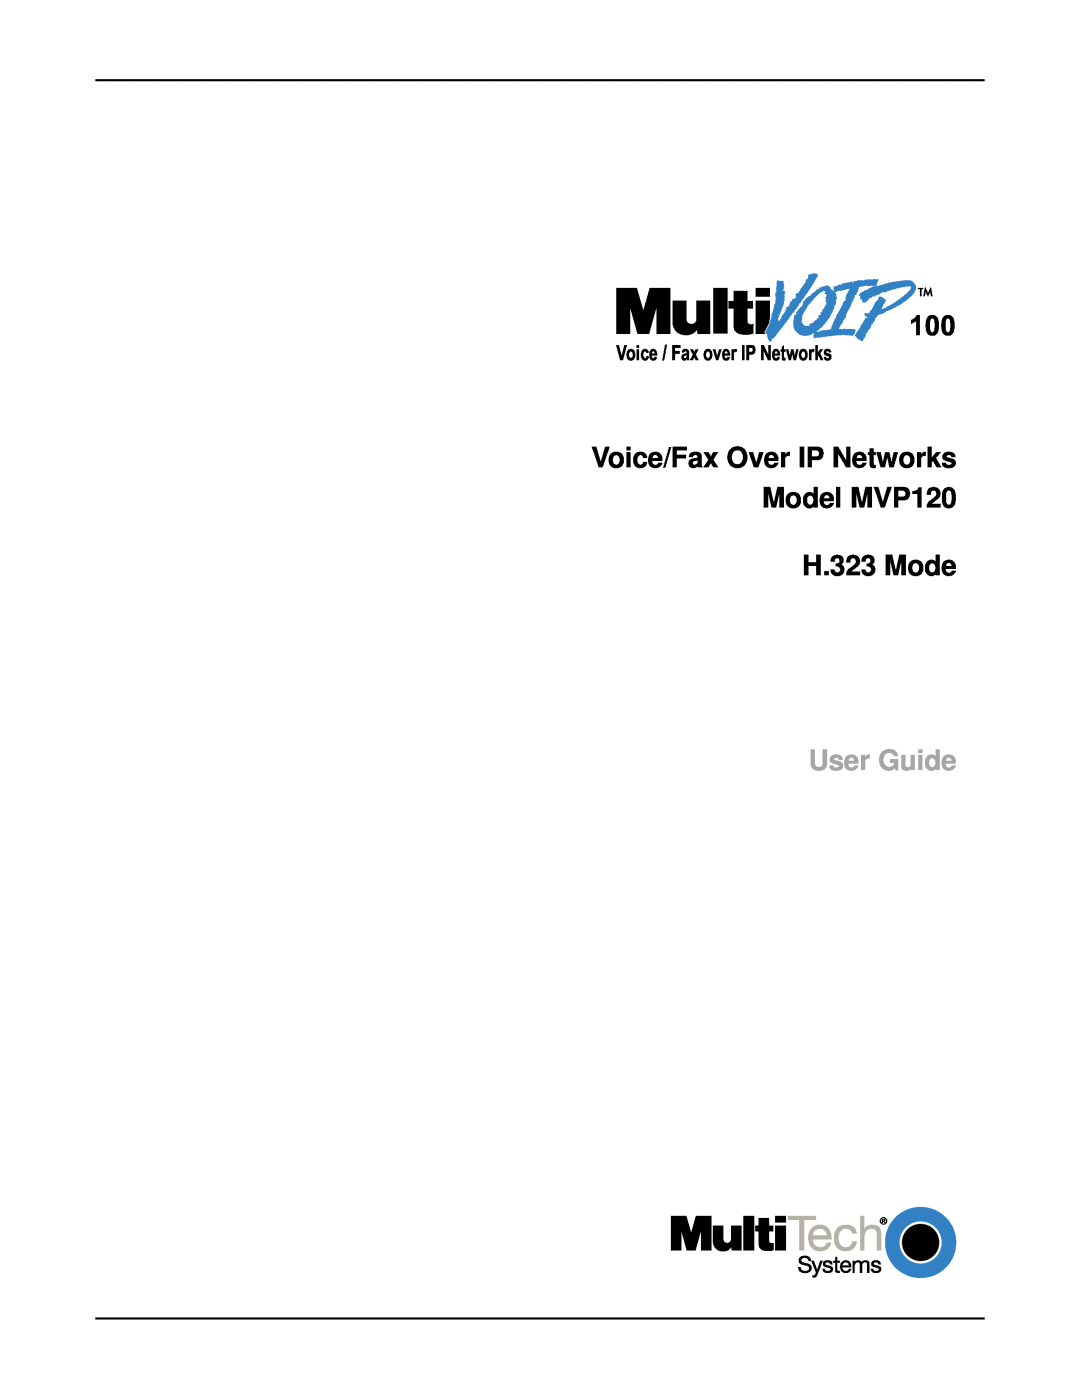 Multi-Tech Systems manual Voice / Fax over IP Networks, Voice/Fax Over IP Networks Model MVP120 H.323 Mode, User Guide 